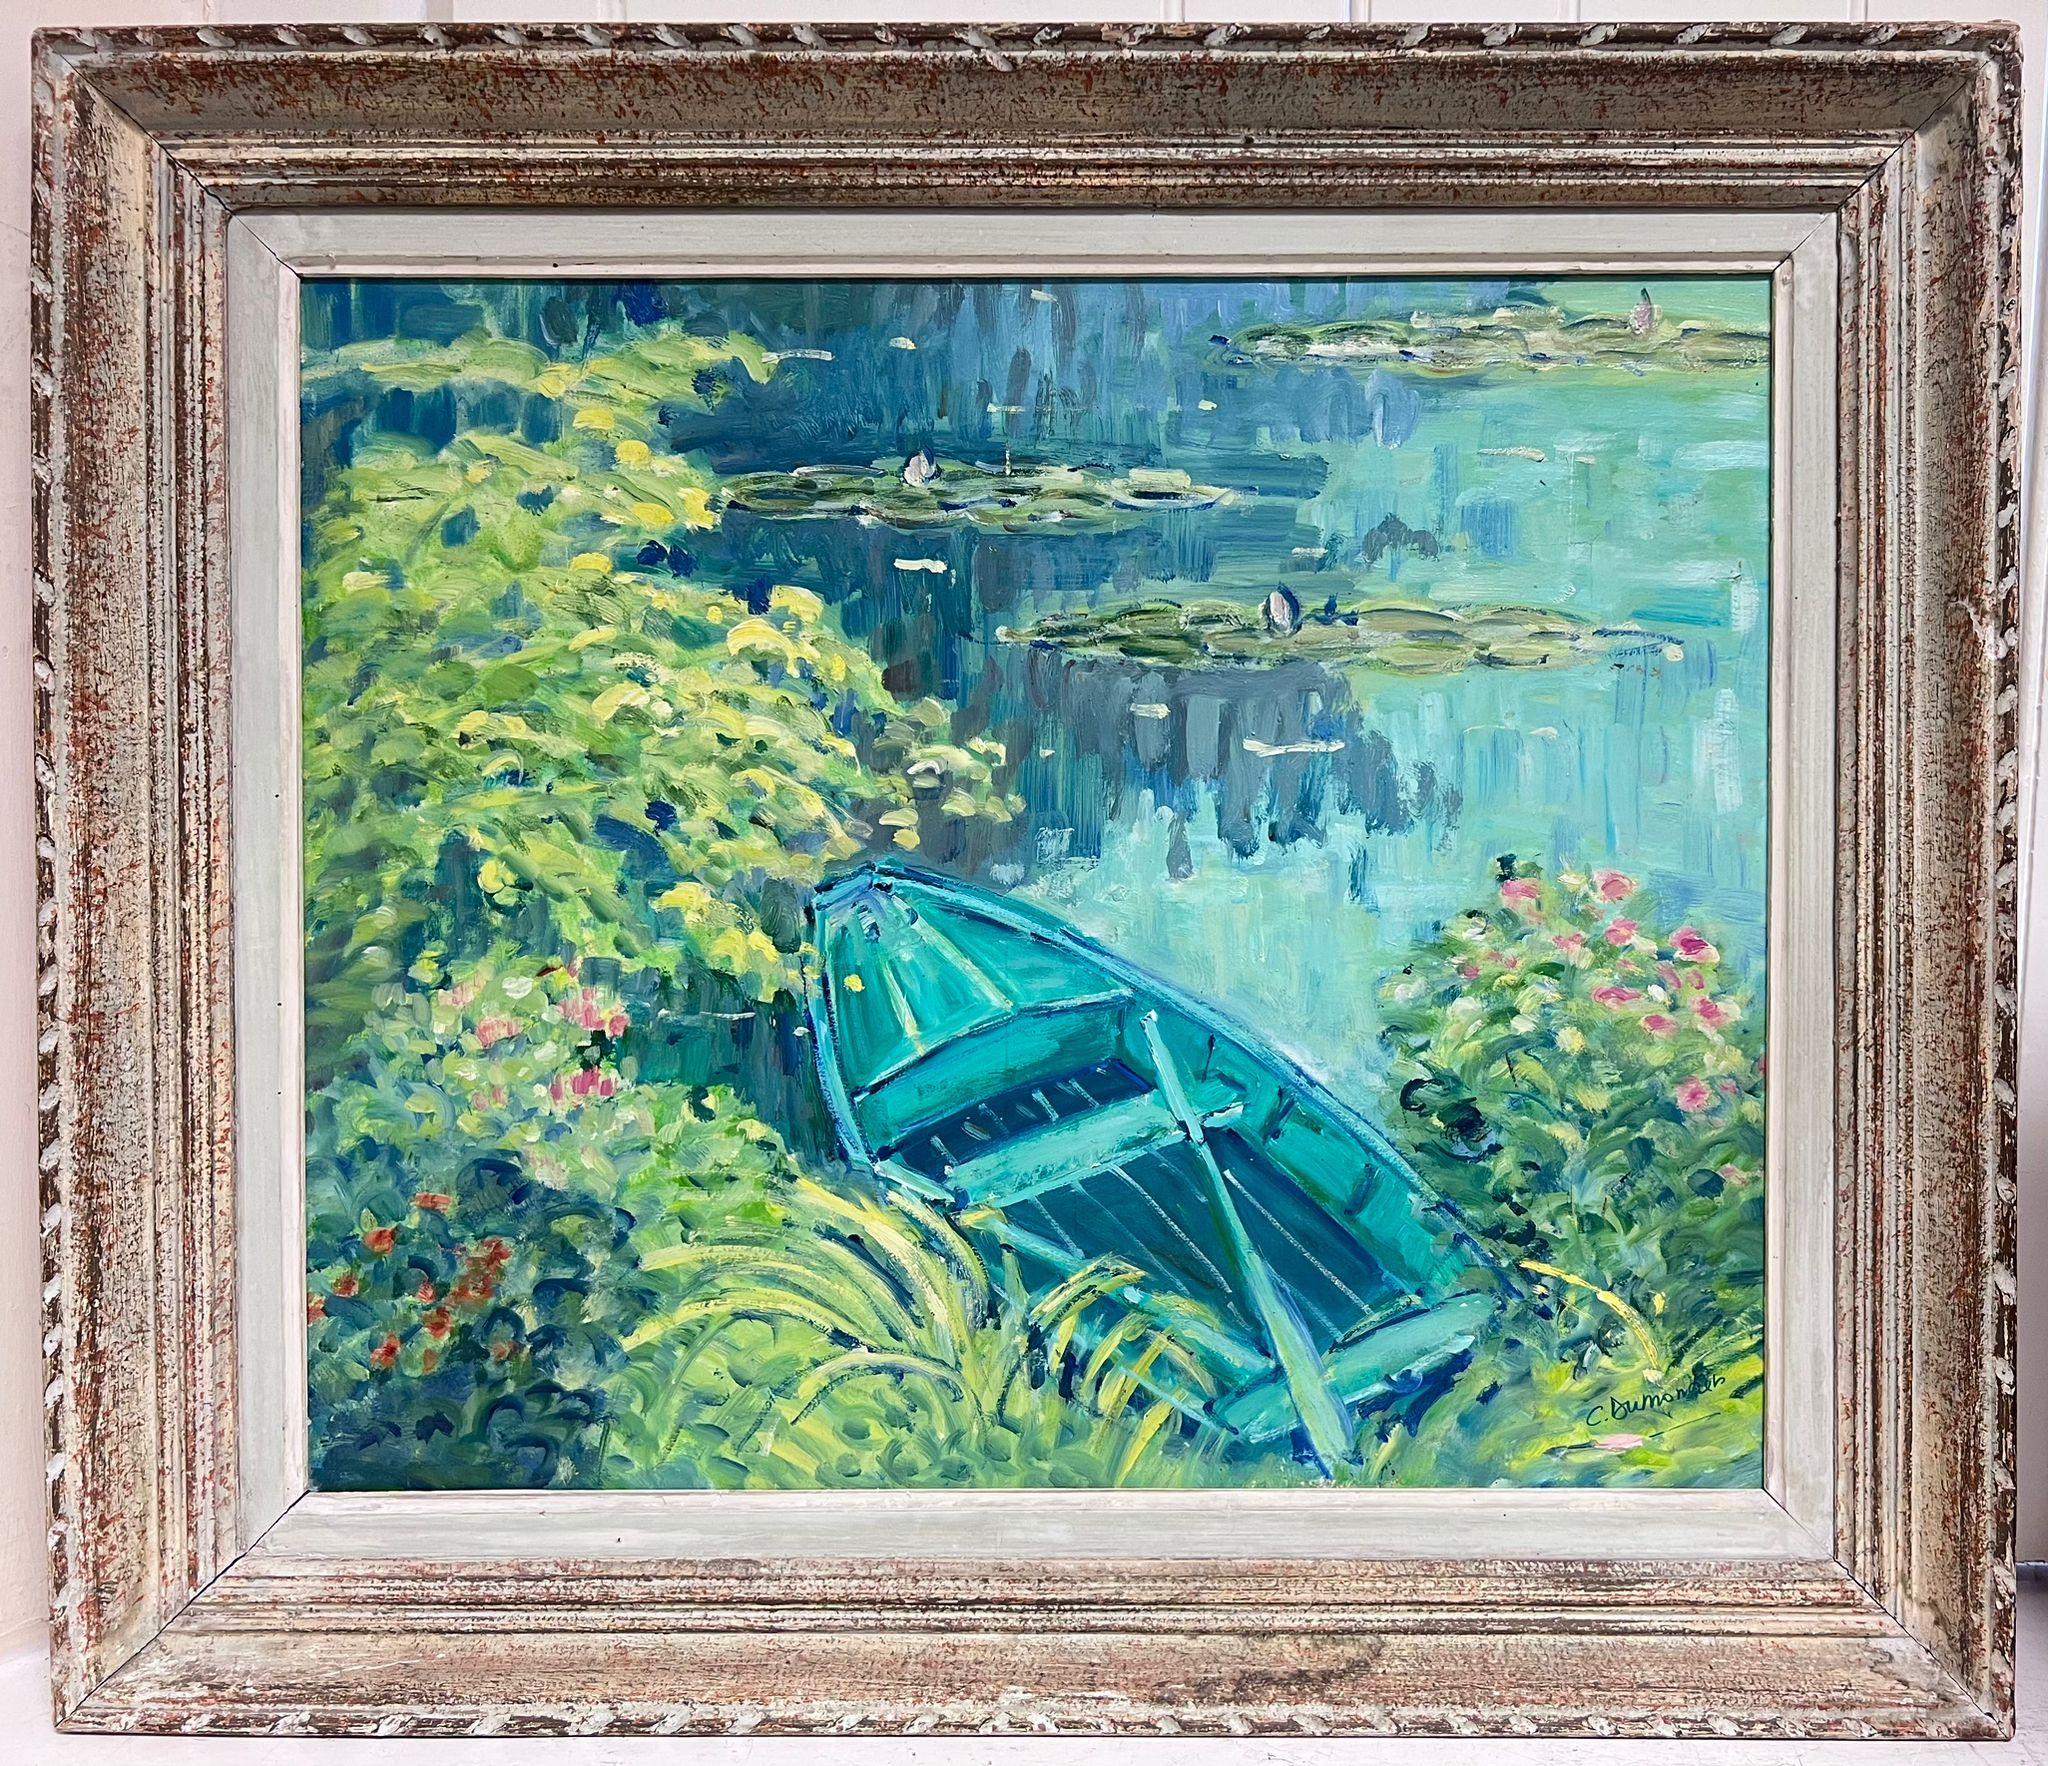 C. Dumontier Landscape Painting - The Waterlily Pond at Giverny Signed French Impressionist Framed Oil Painting